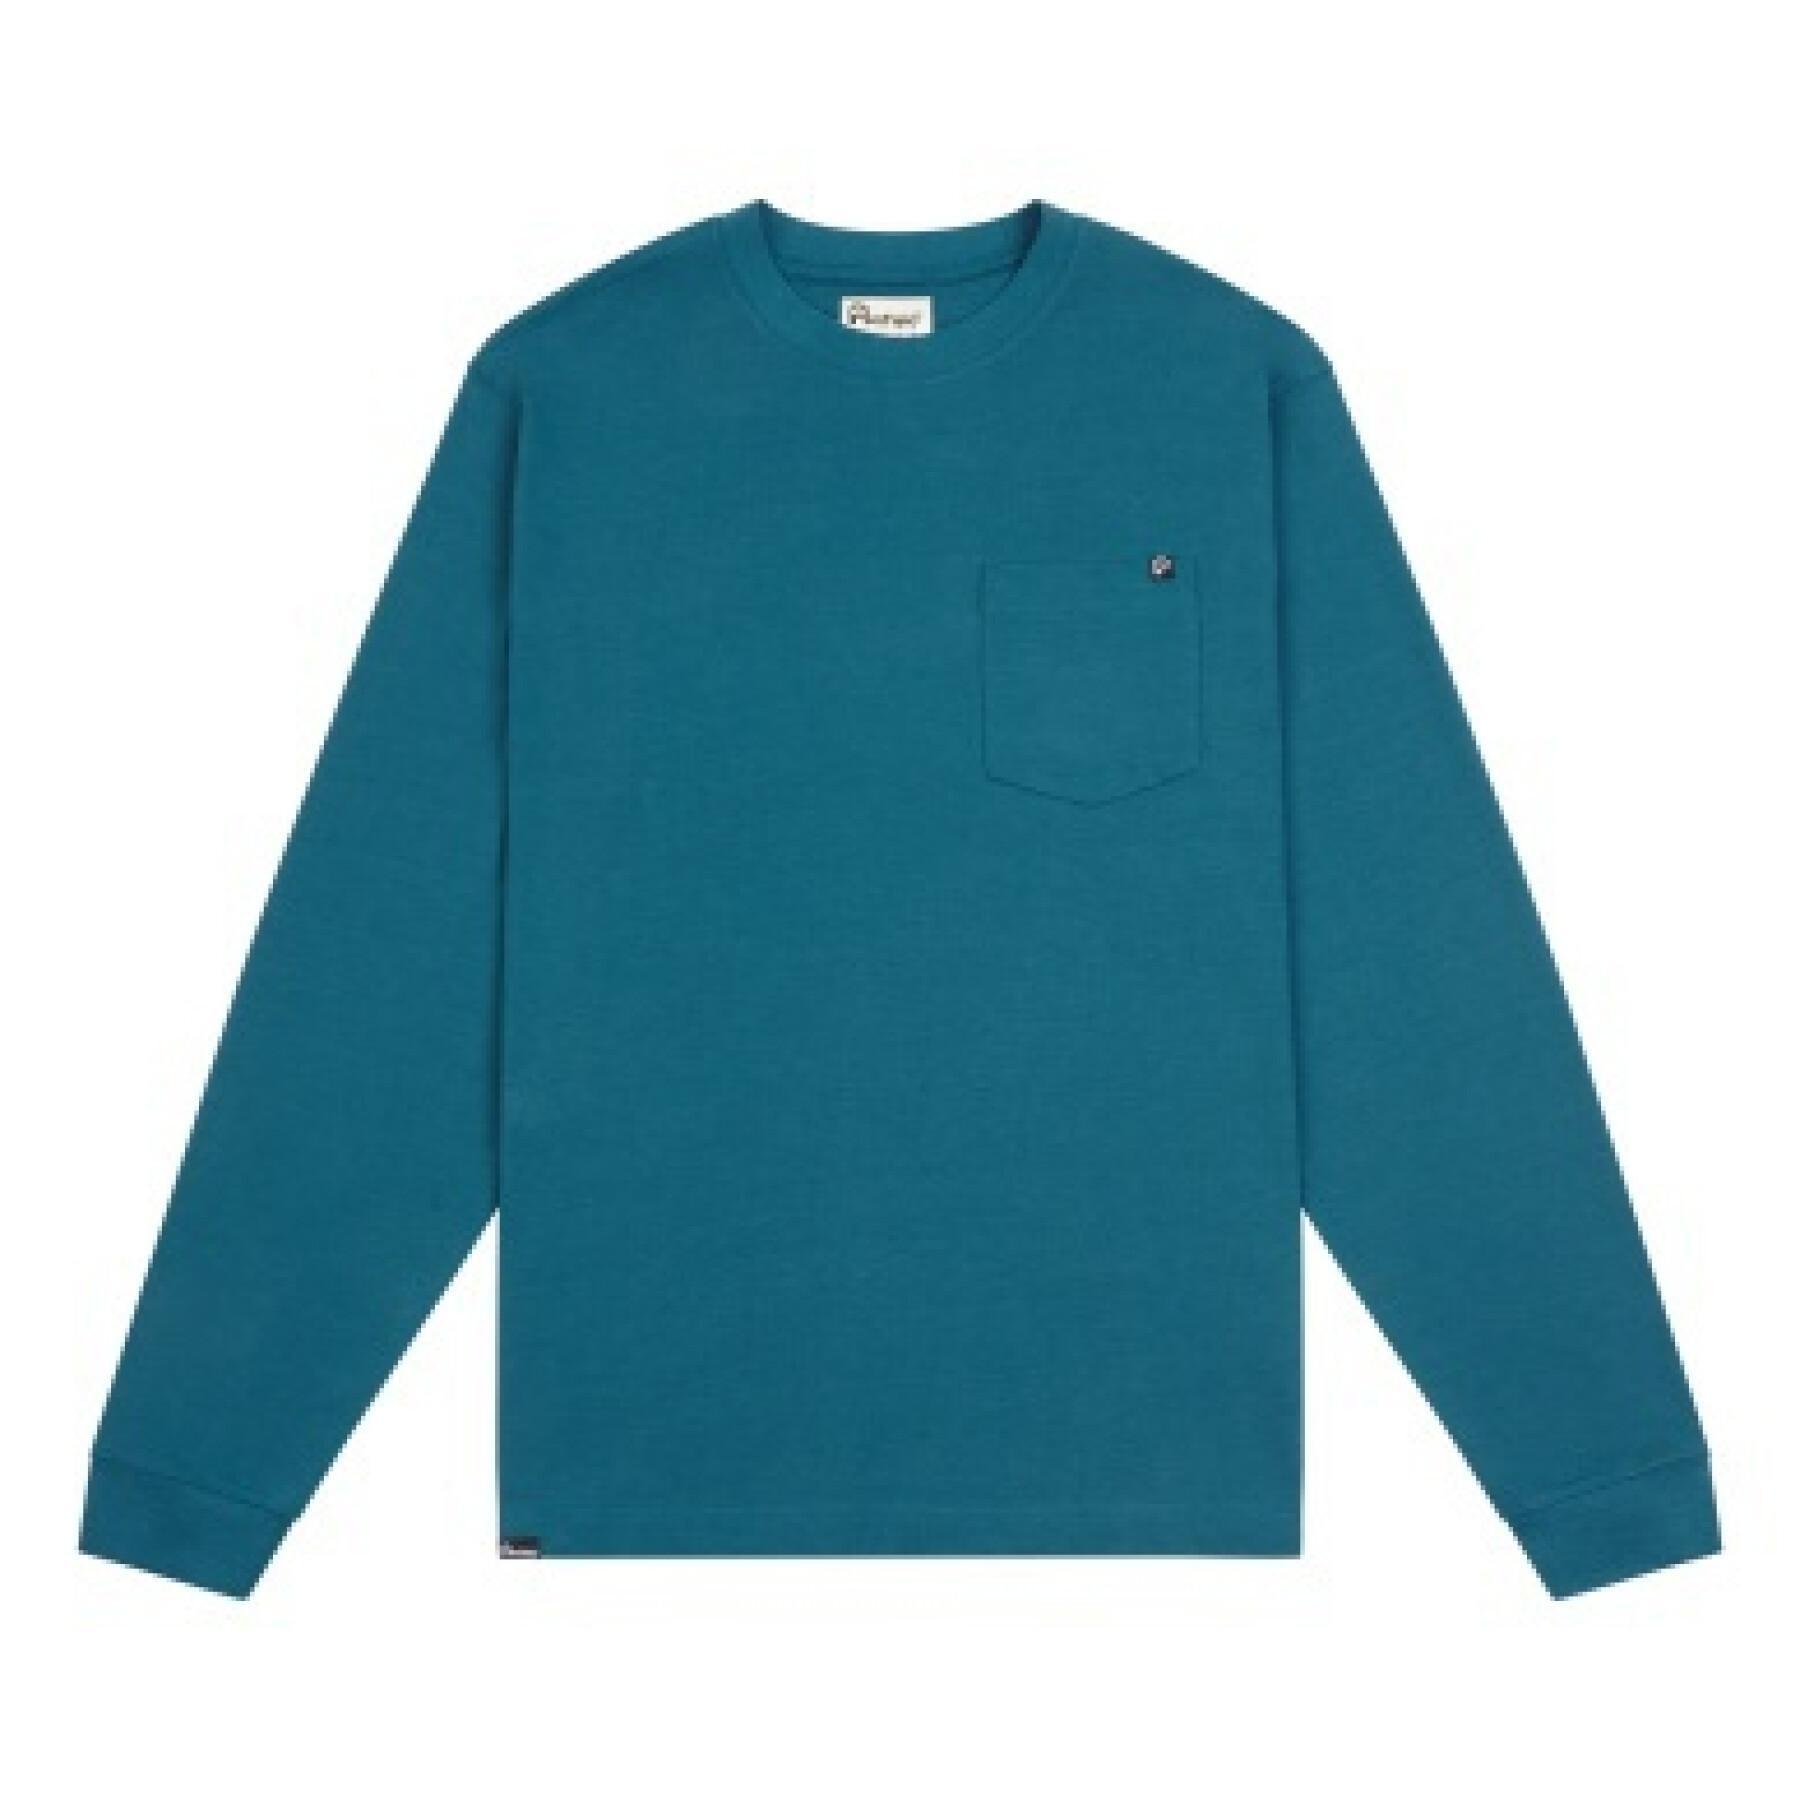 Long sleeve T-shirt with pocket Penfield chest